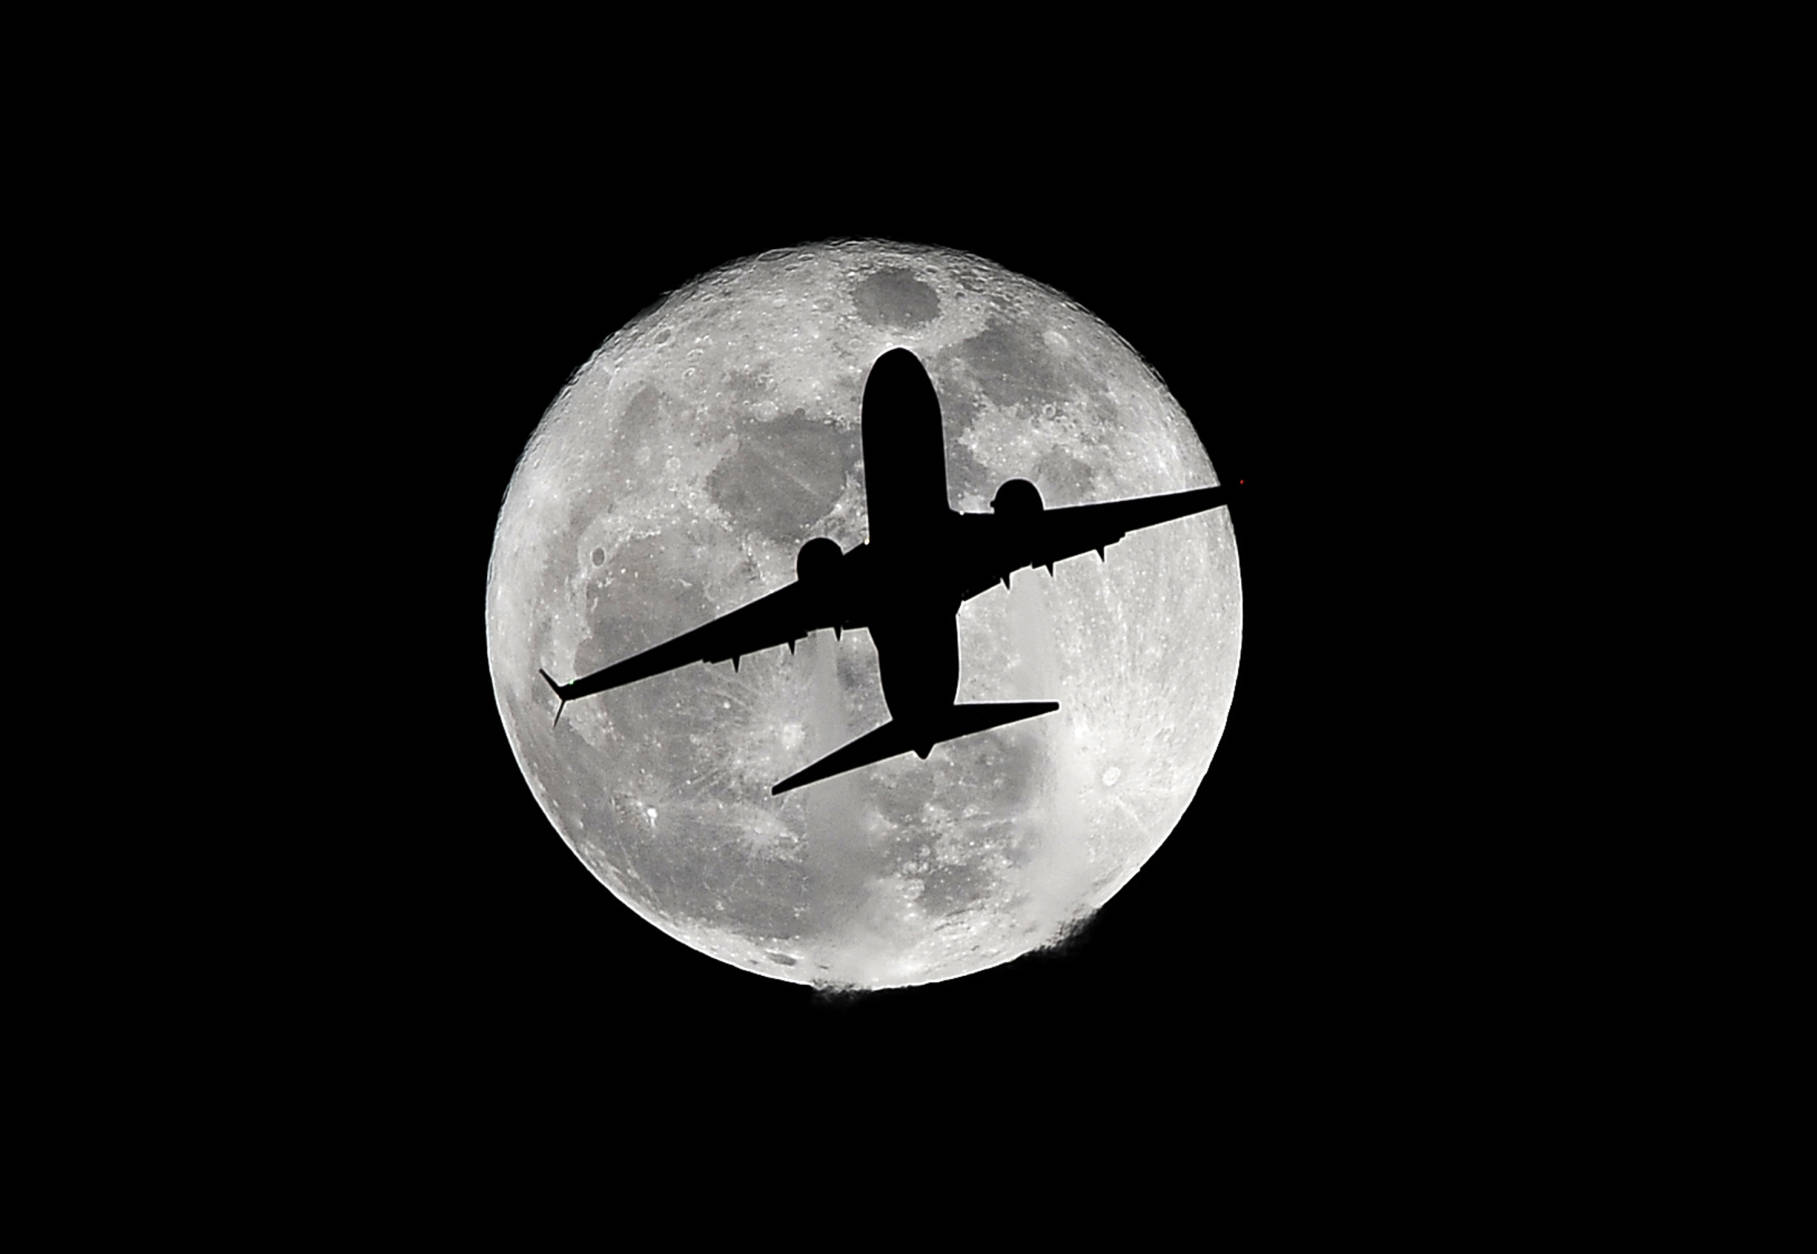 A passenger plane heading to Los Angeles International Airport passes by the supermoon Monday, Nov. 14, 2016. The phenomenon known as the supermoon occurs because the moon follows an elliptical orbit around the Earth. This week, the moon is coming closer to the Earth than at any time since January 1948. (AP Photo/Nick Ut)